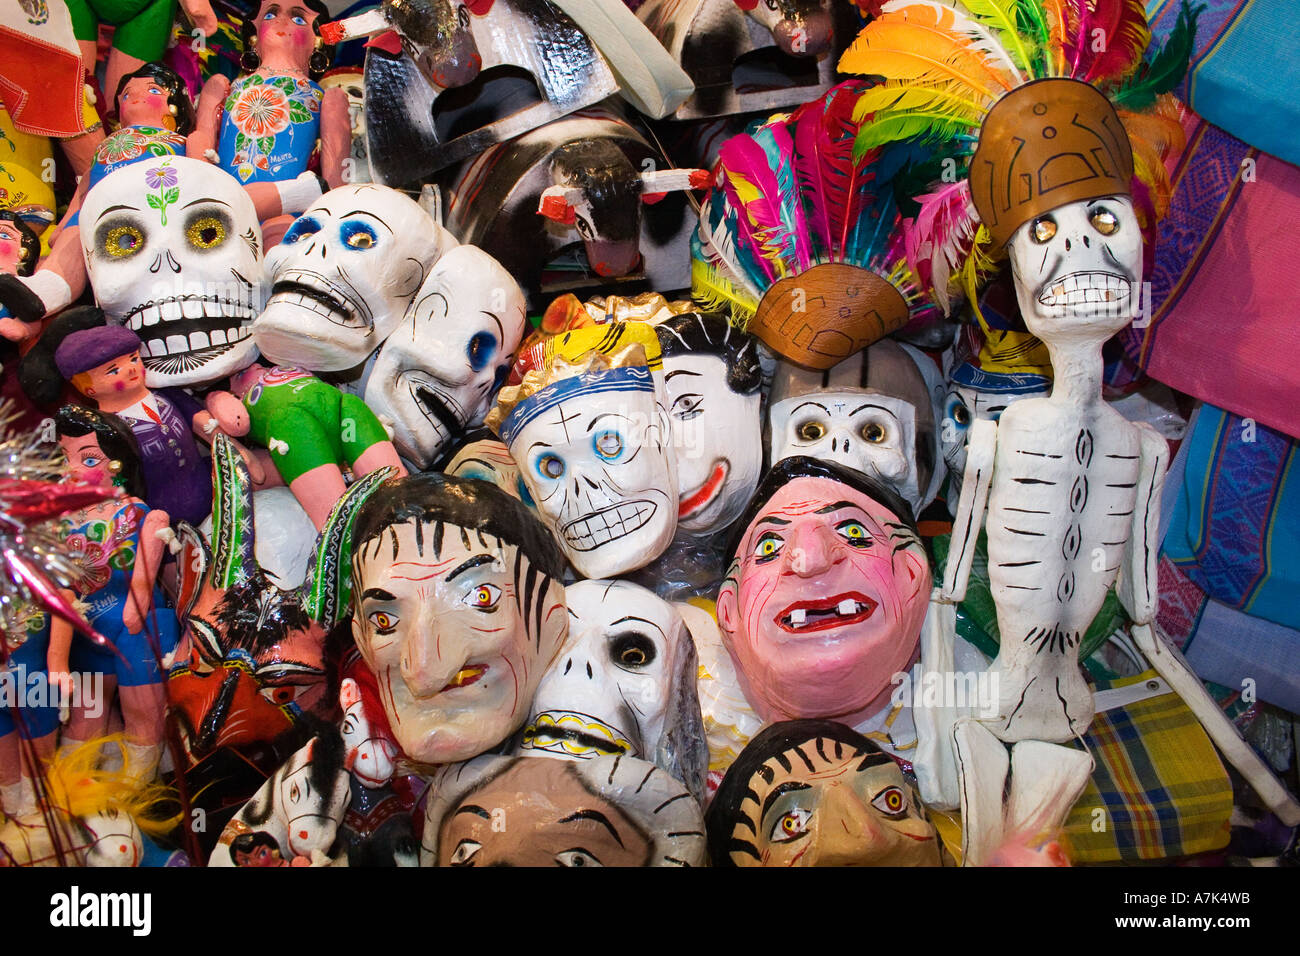 DAY OF THE DEAD items for sale in the CENTRAL COVERED MARKET GUANAJUATO MEXICO Stock Photo